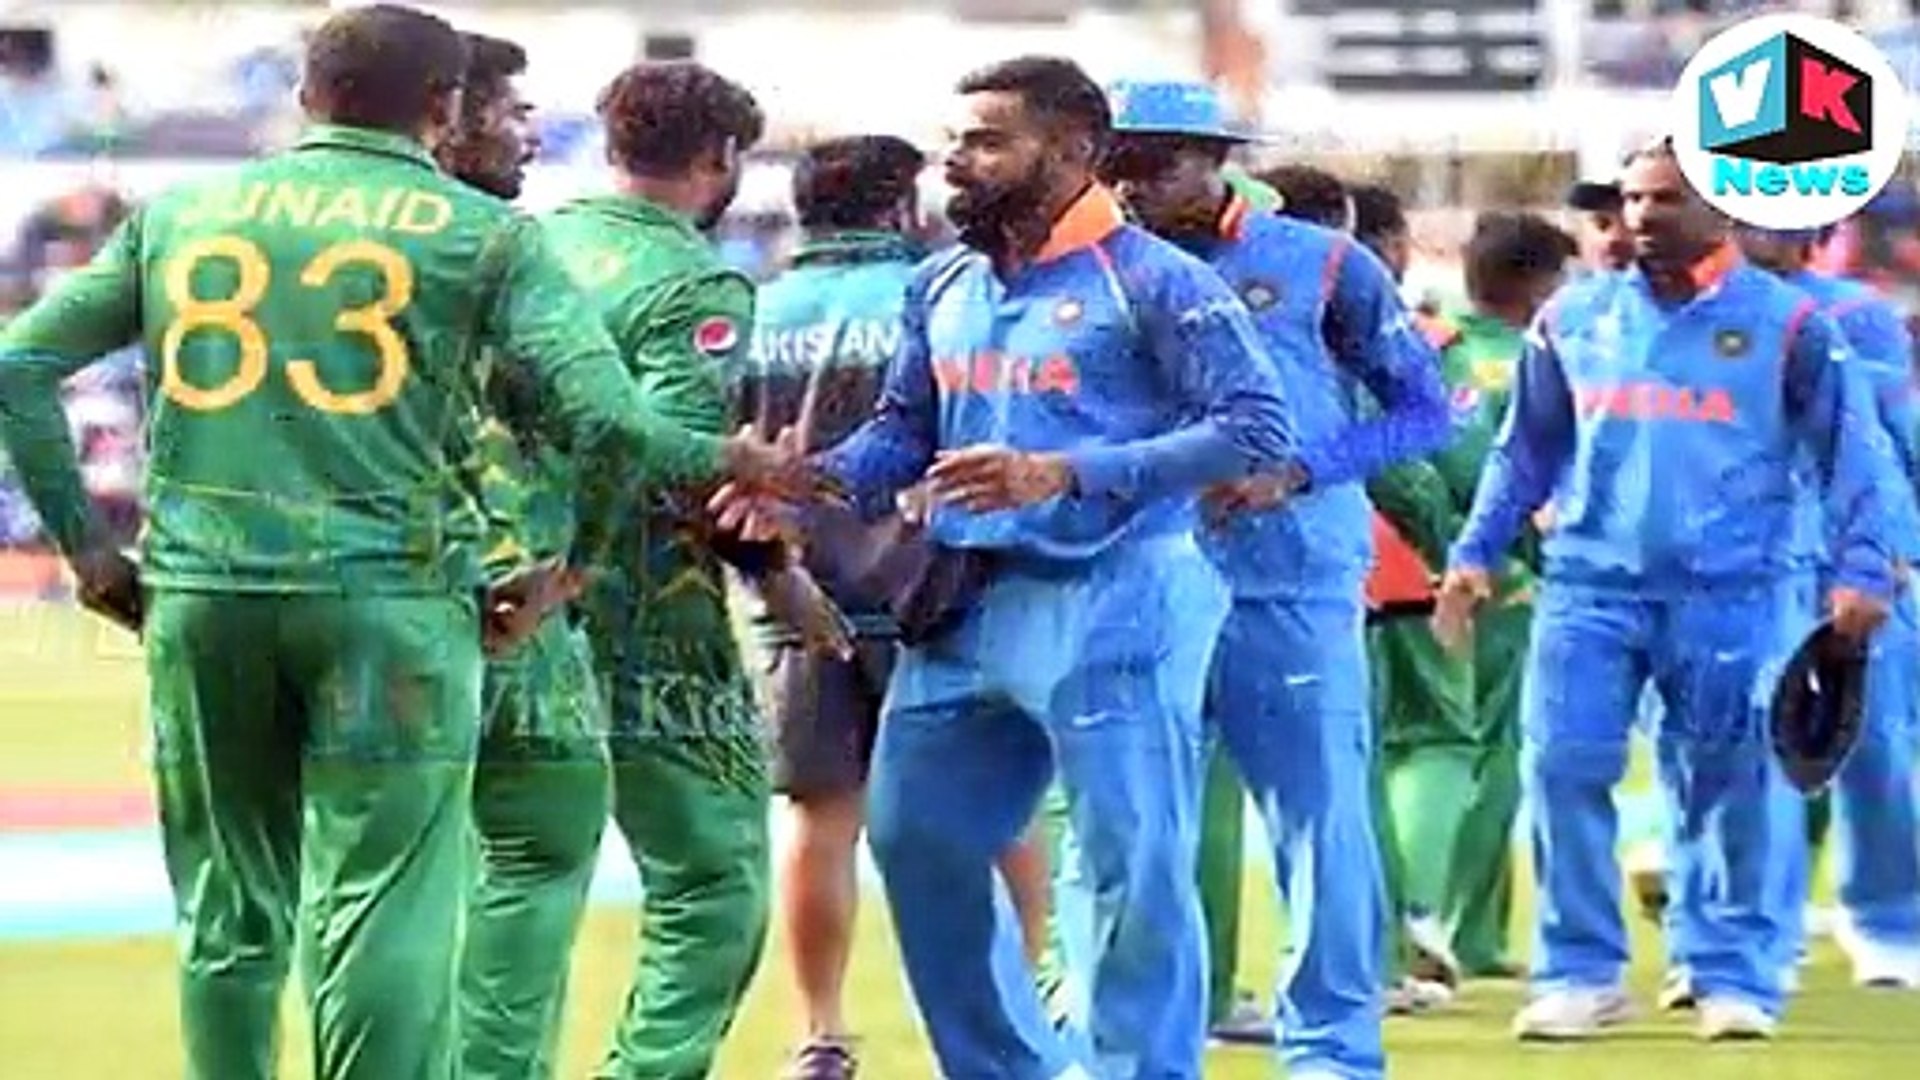 Pak Vs Ind Match Was Fixed ?? Indian Media Shares Exclusive Footage..